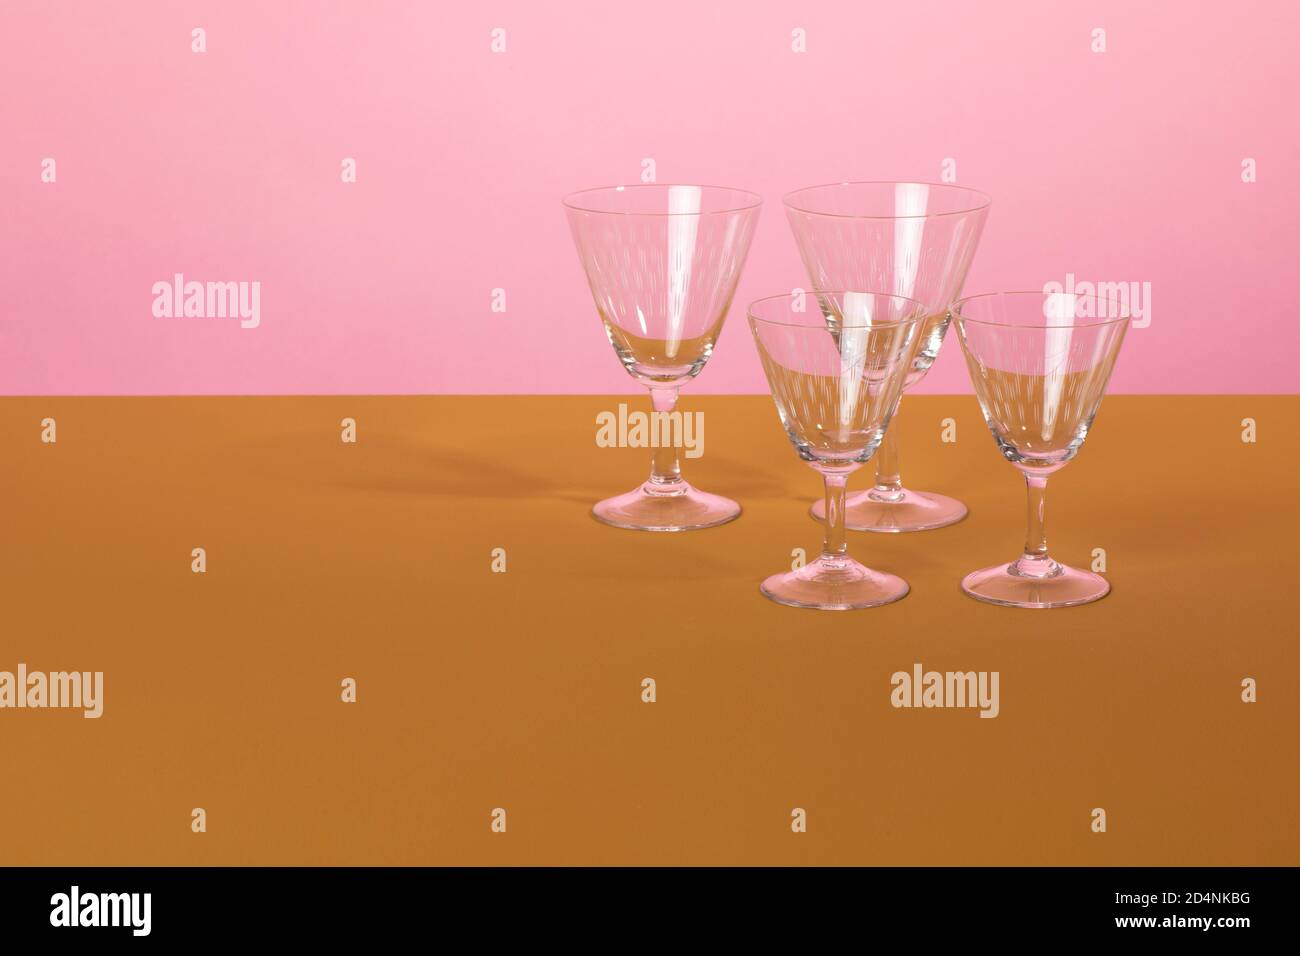 Set of classsic martini cocktail glasses standing on a brown surface and a pink colored background. Clean minimalistic elegant style Stock Photo